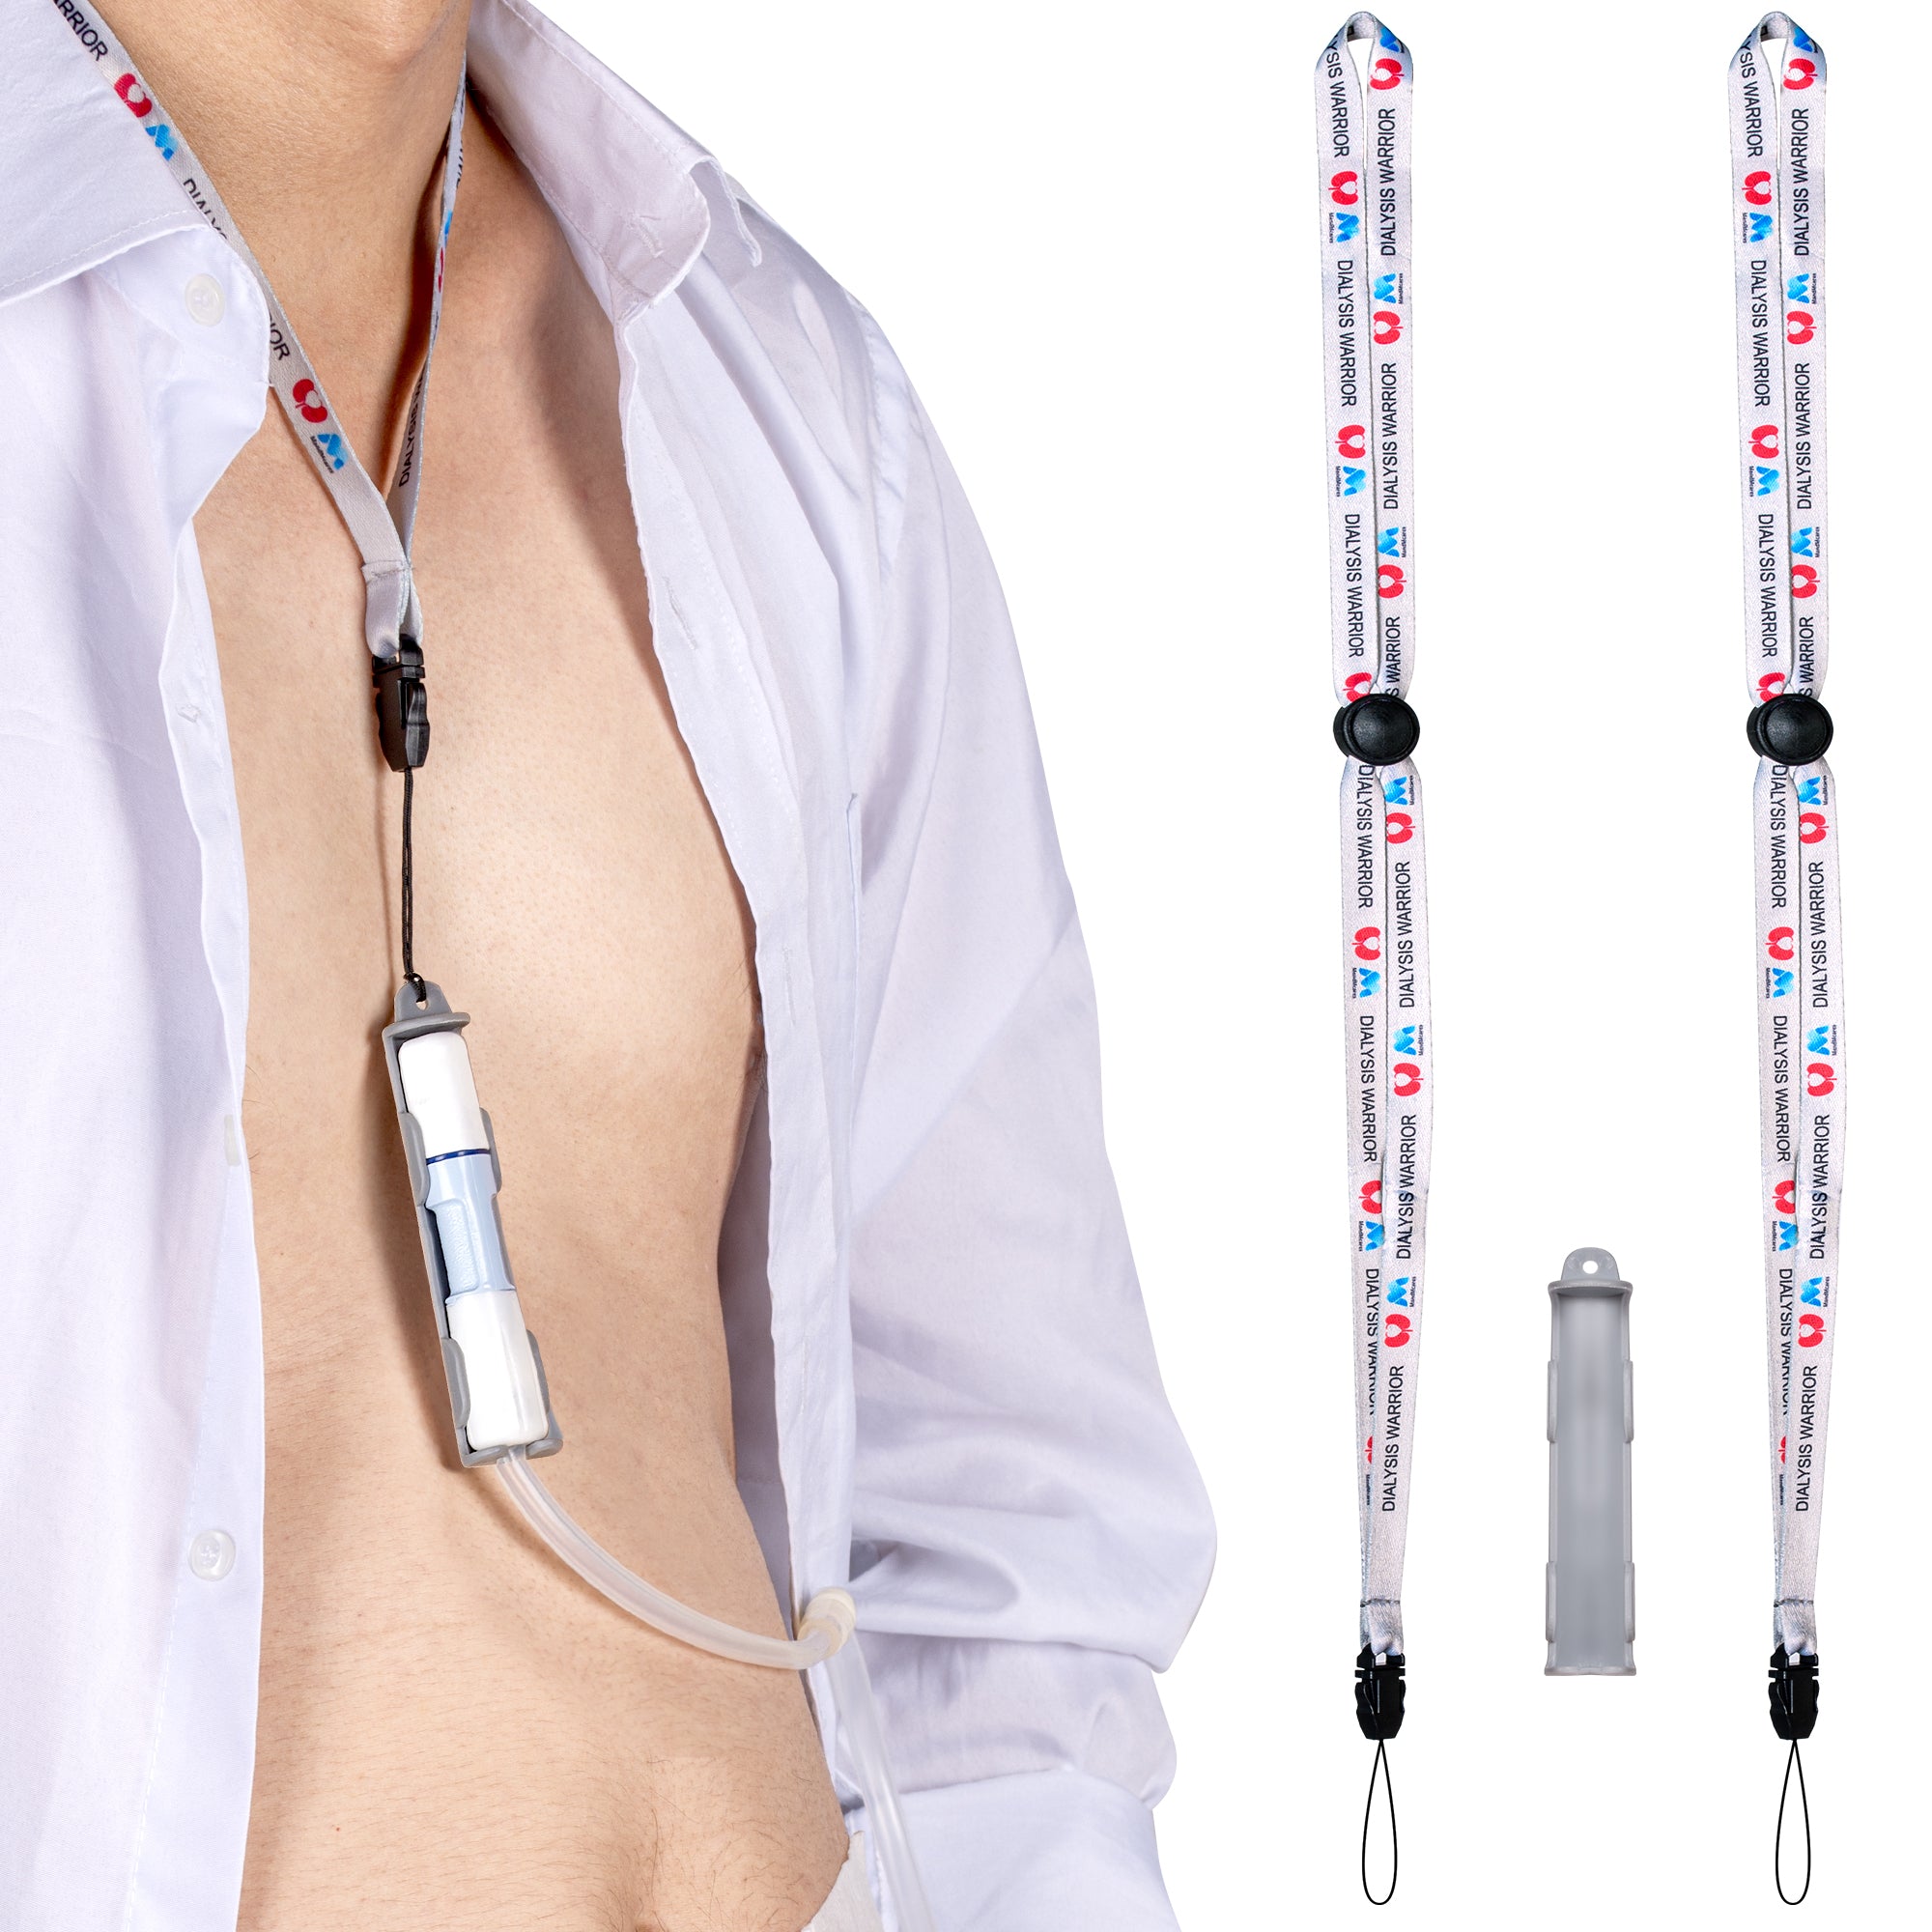 Peritoneal Dialysis Transfer Set Holder for Baxter | 2 Spring Adjustable Lanyard Included